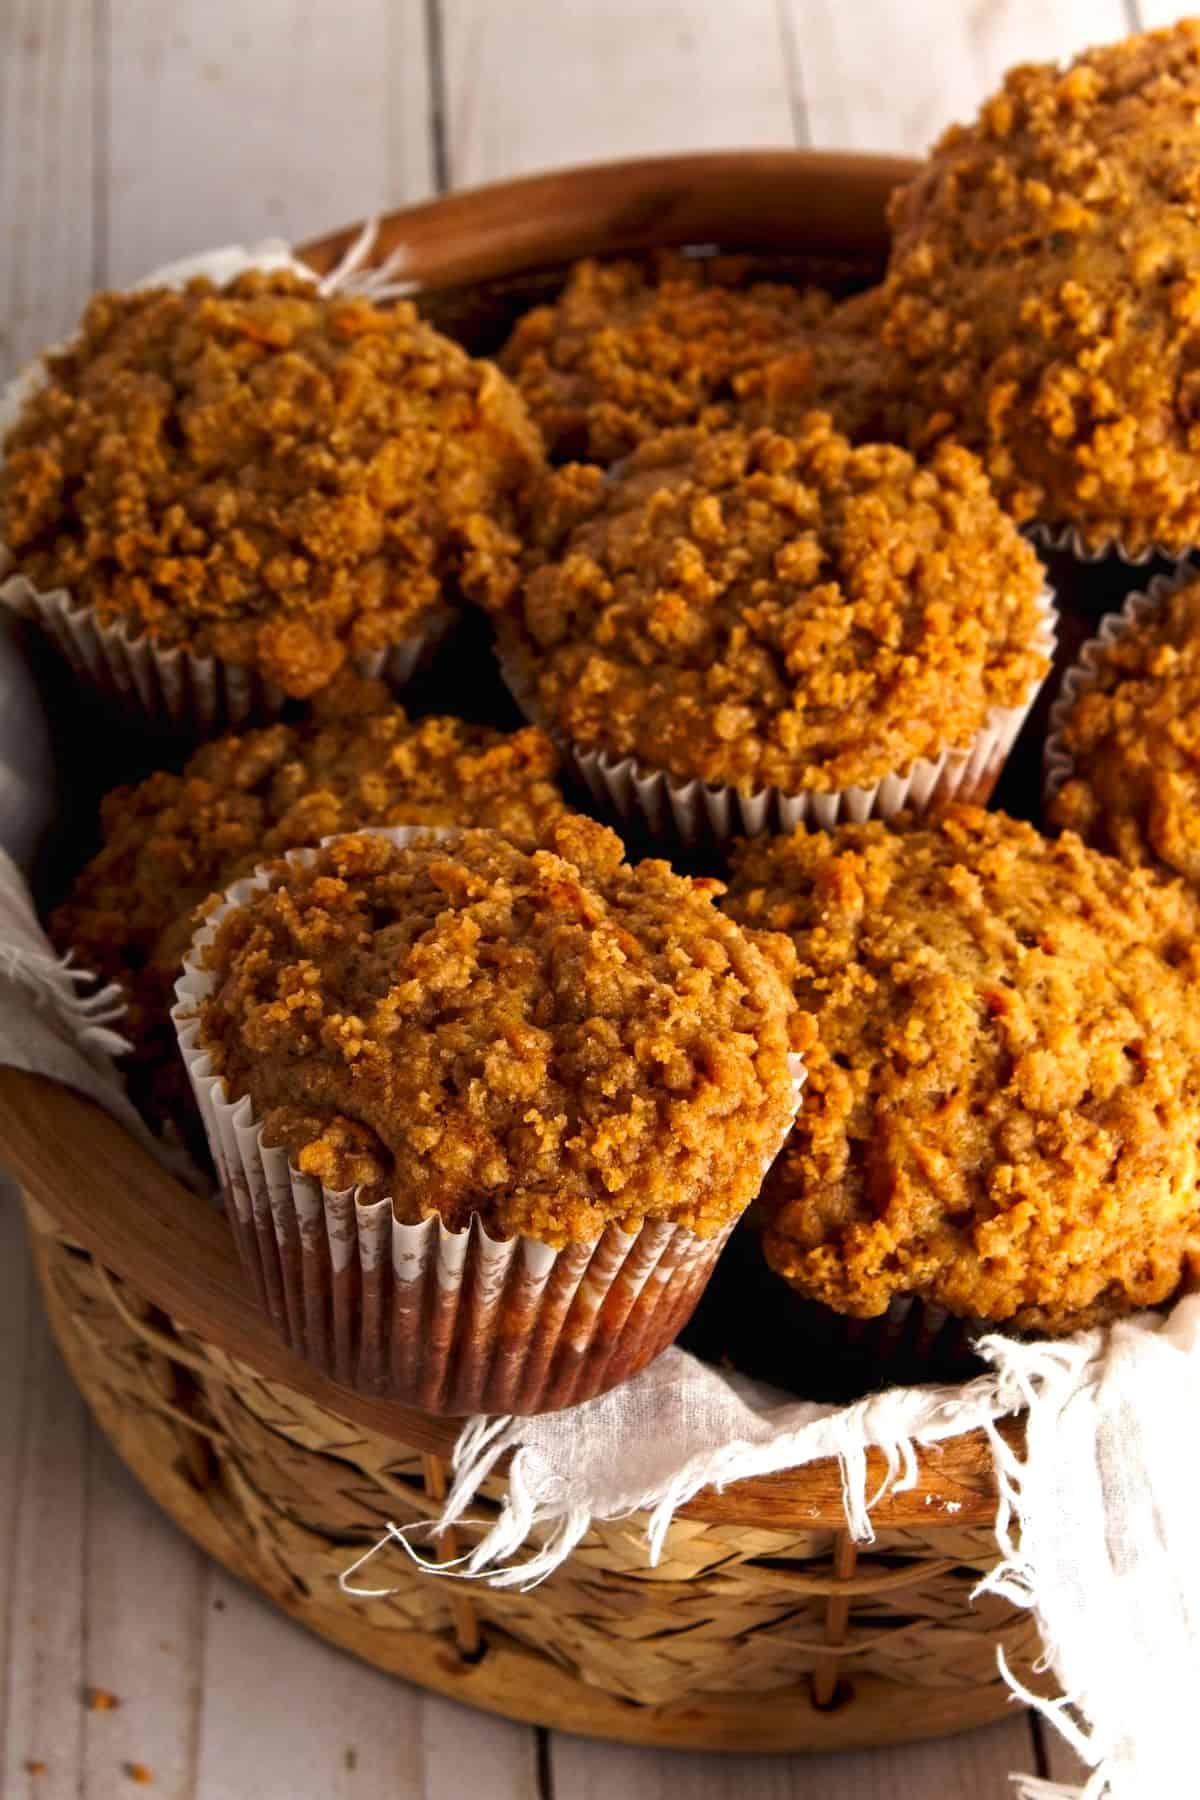 Sweet Potato muffins in a basket with cream colored napkin.